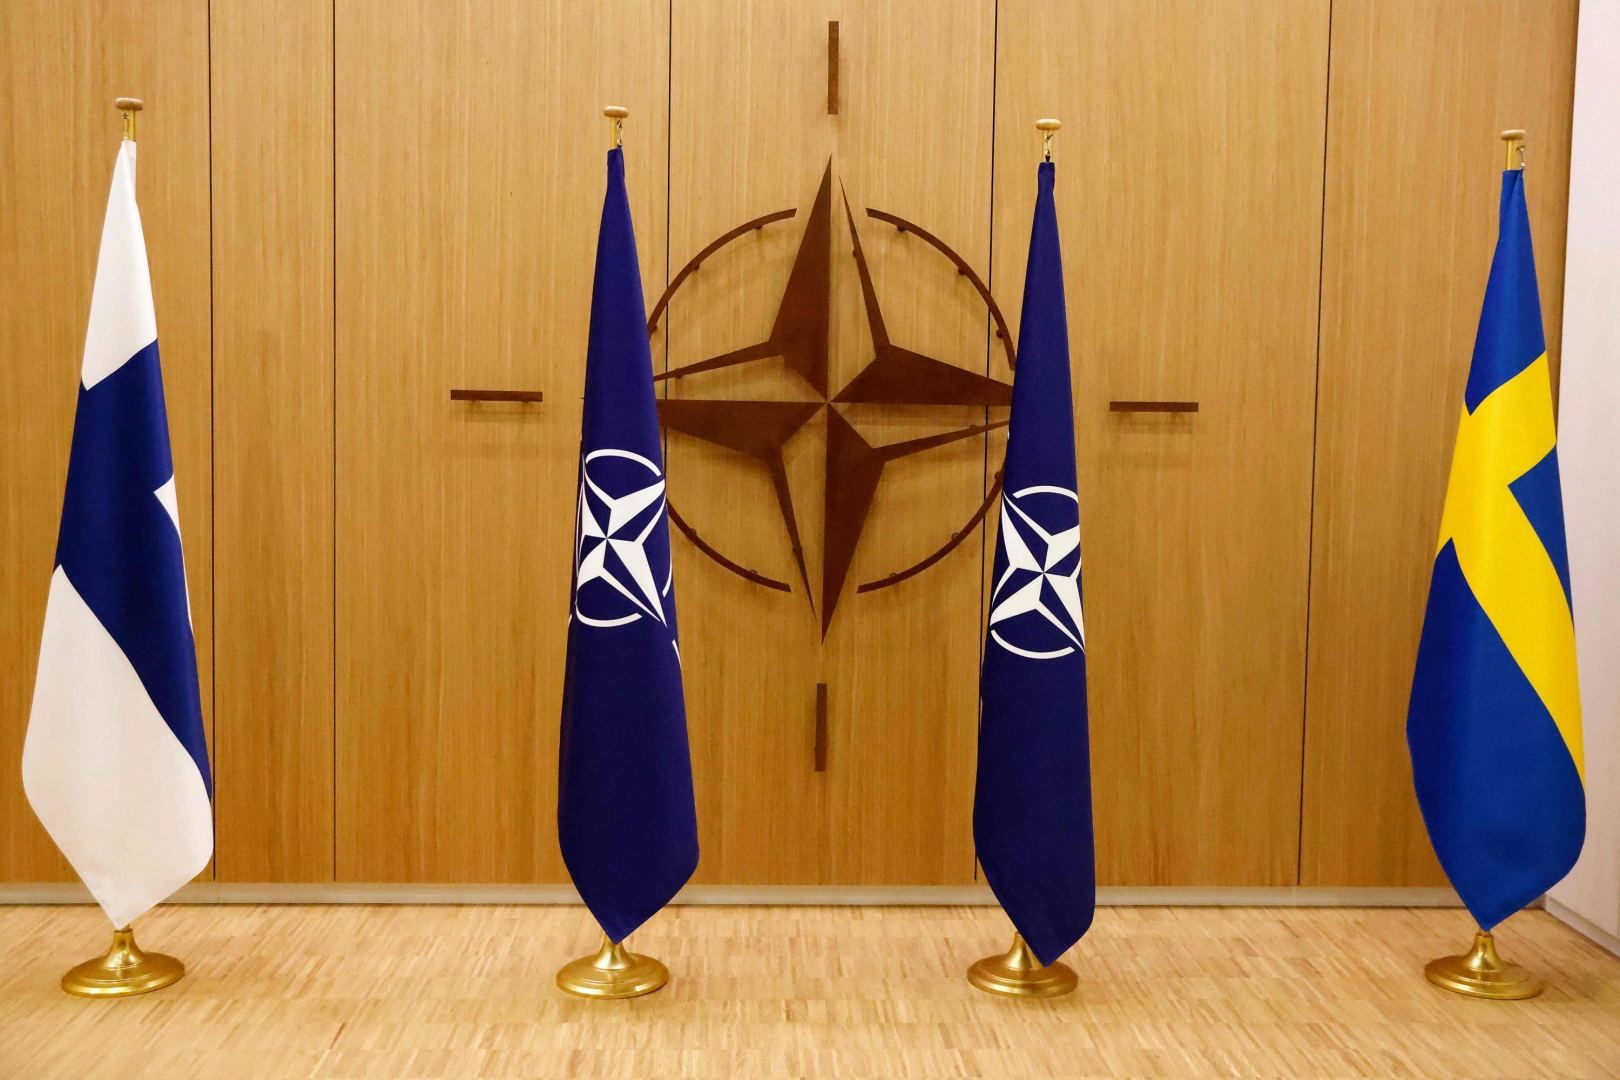 Finland, Sweden complete NATO accession talks, accession protocols to be signed Tuesday